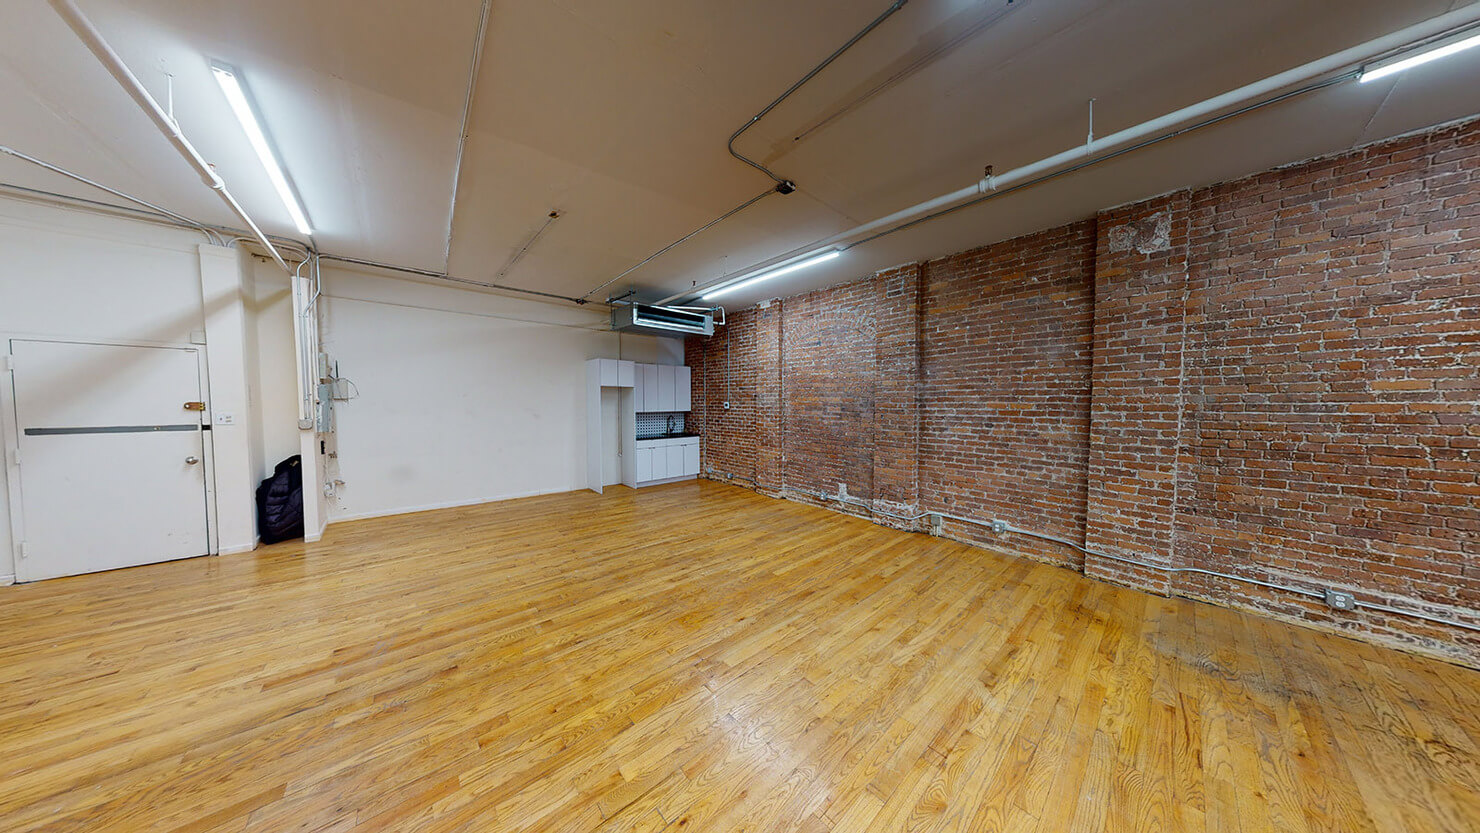 39 West 14th Street Office Space, Suite #407 - Brick Walls